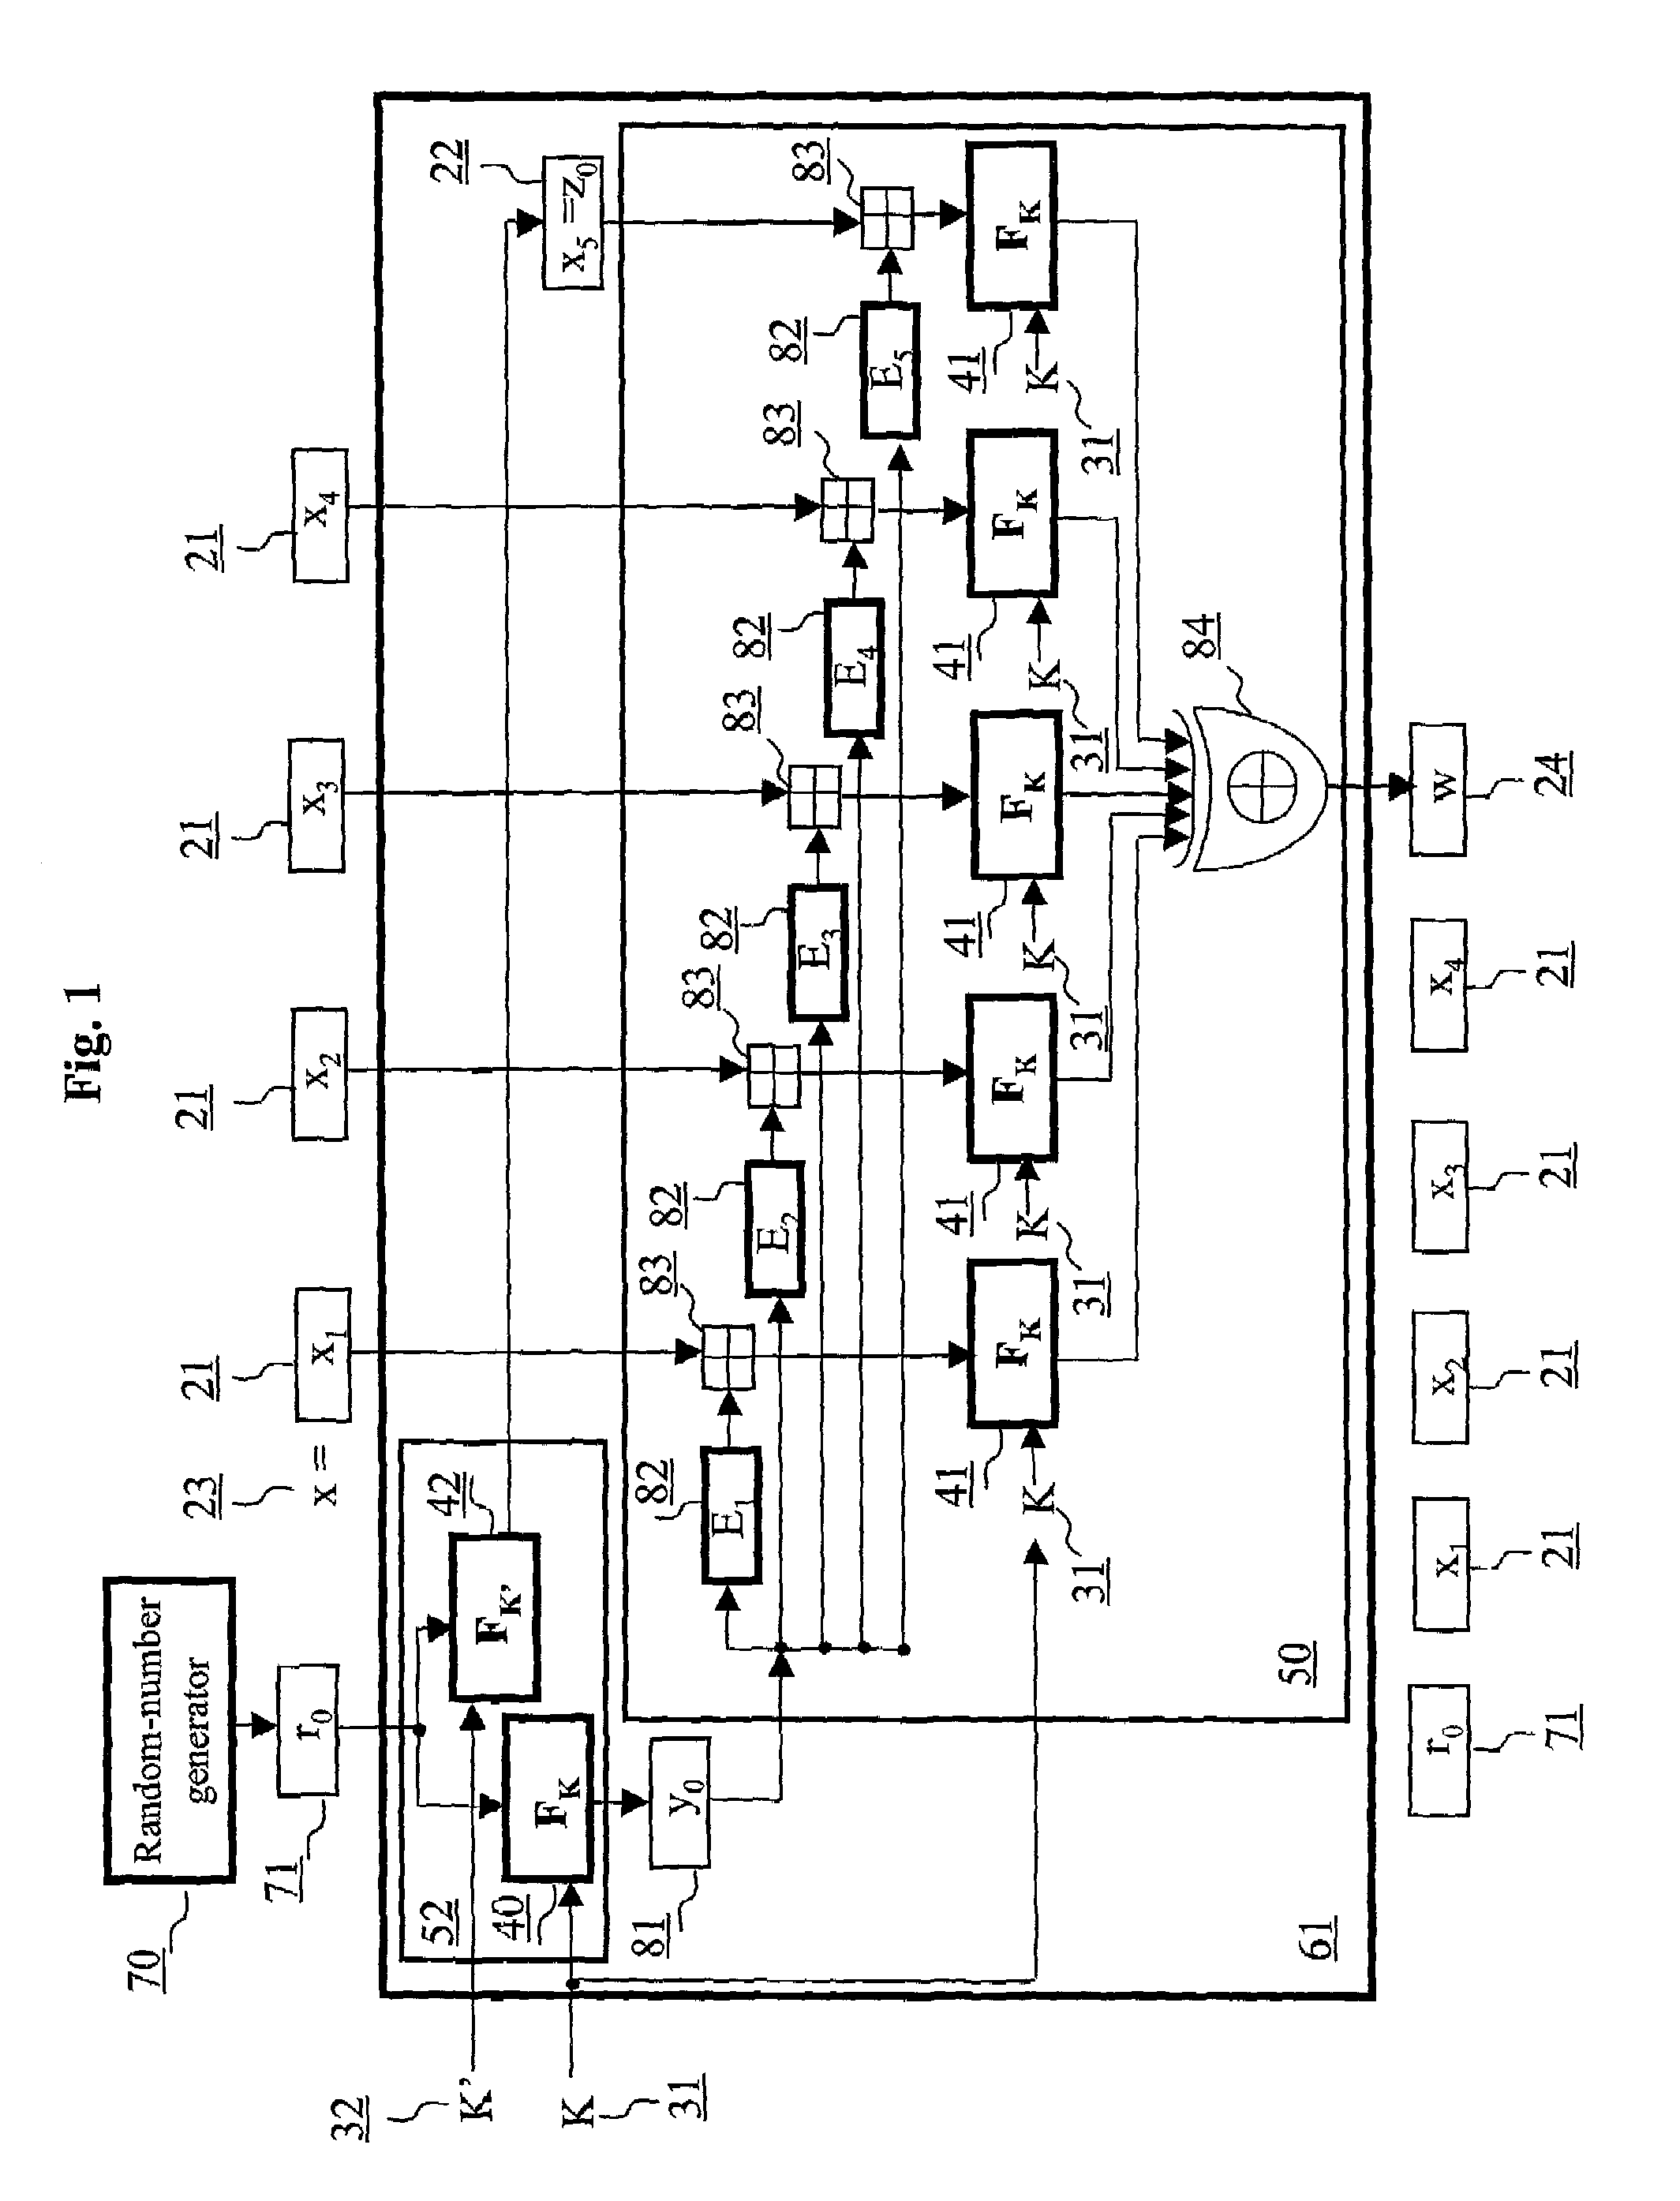 Authentication method and schemes for data integrity protection